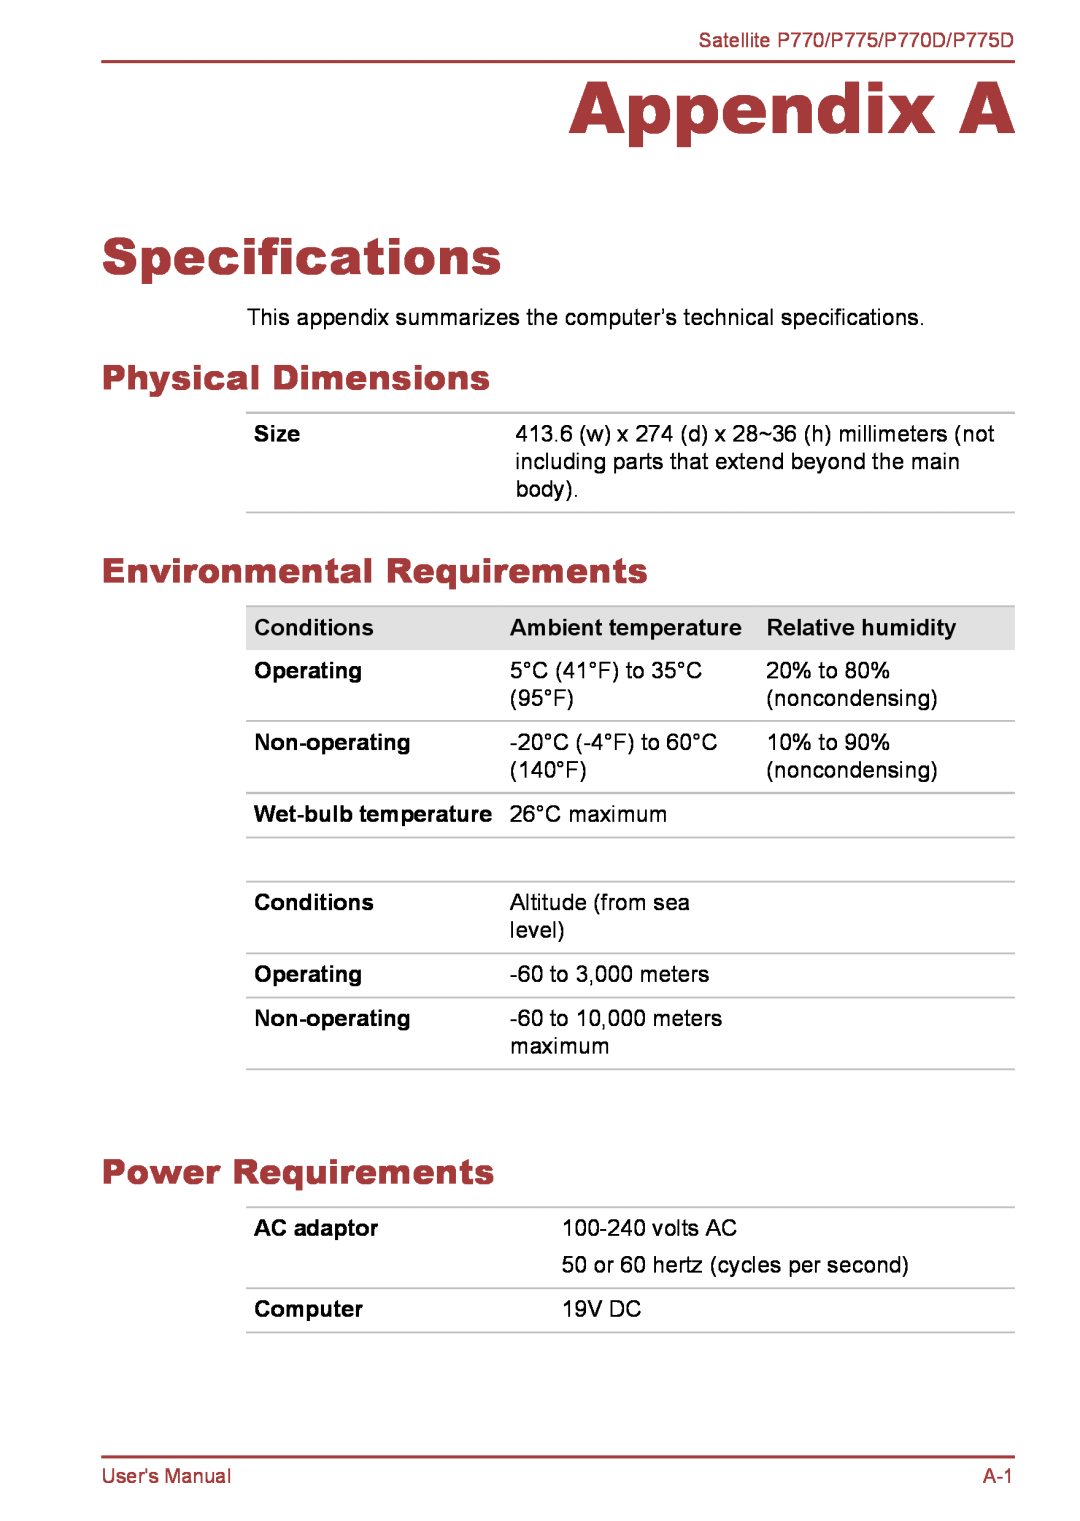 Toshiba P770 Appendix A, Specifications, Physical Dimensions, Environmental Requirements, Power Requirements, Size 